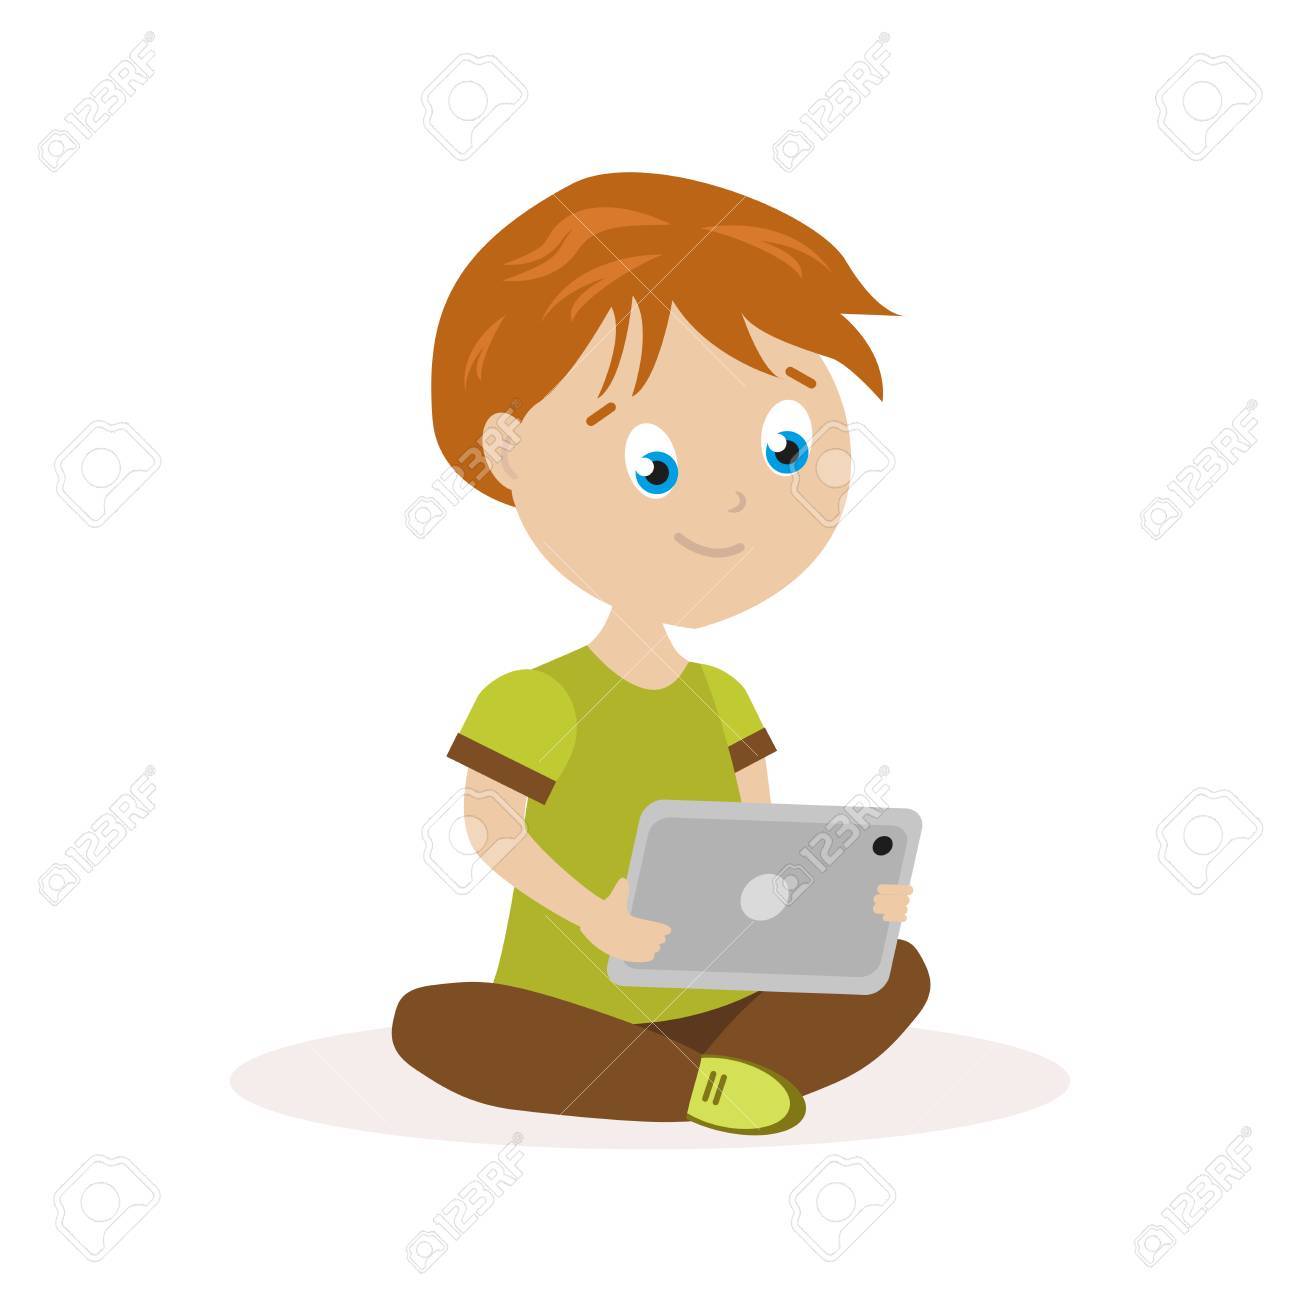 Tablet Clipart kid electronics